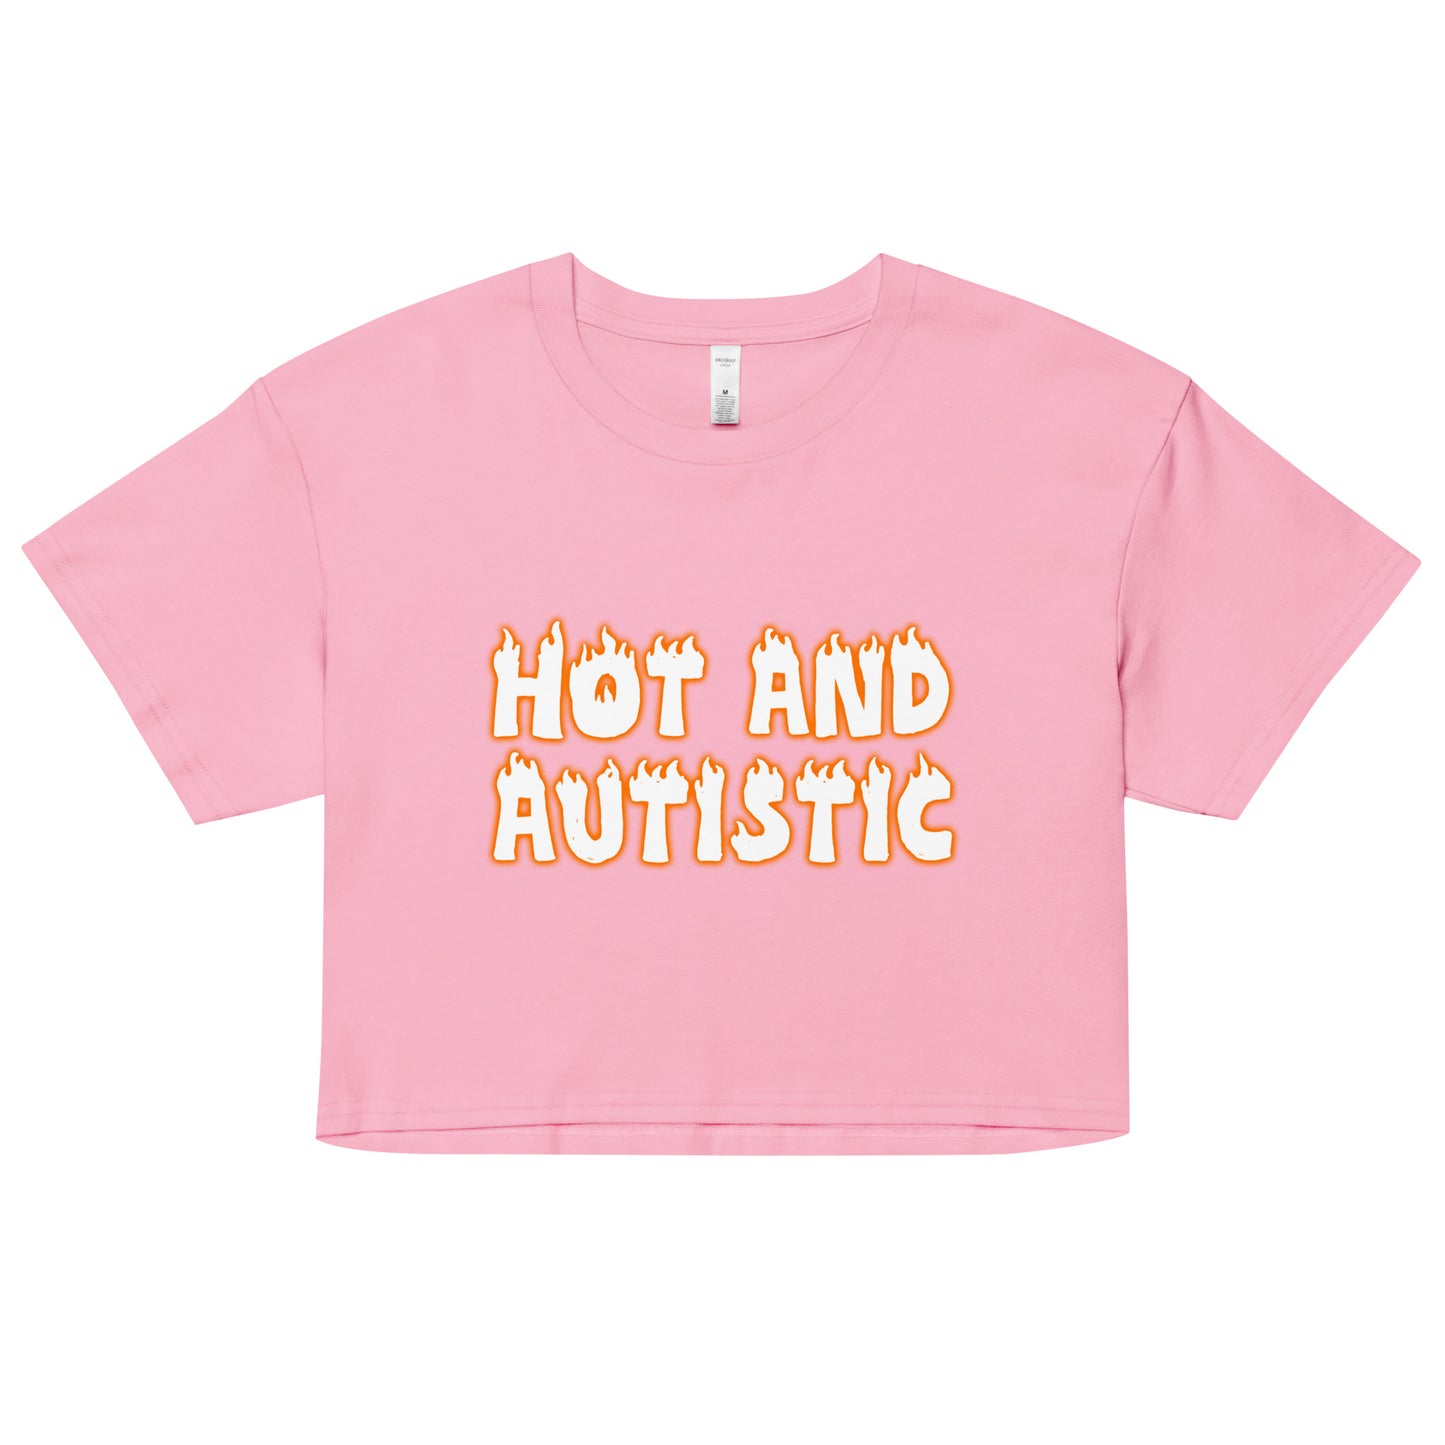 Hot and Autistic crop top